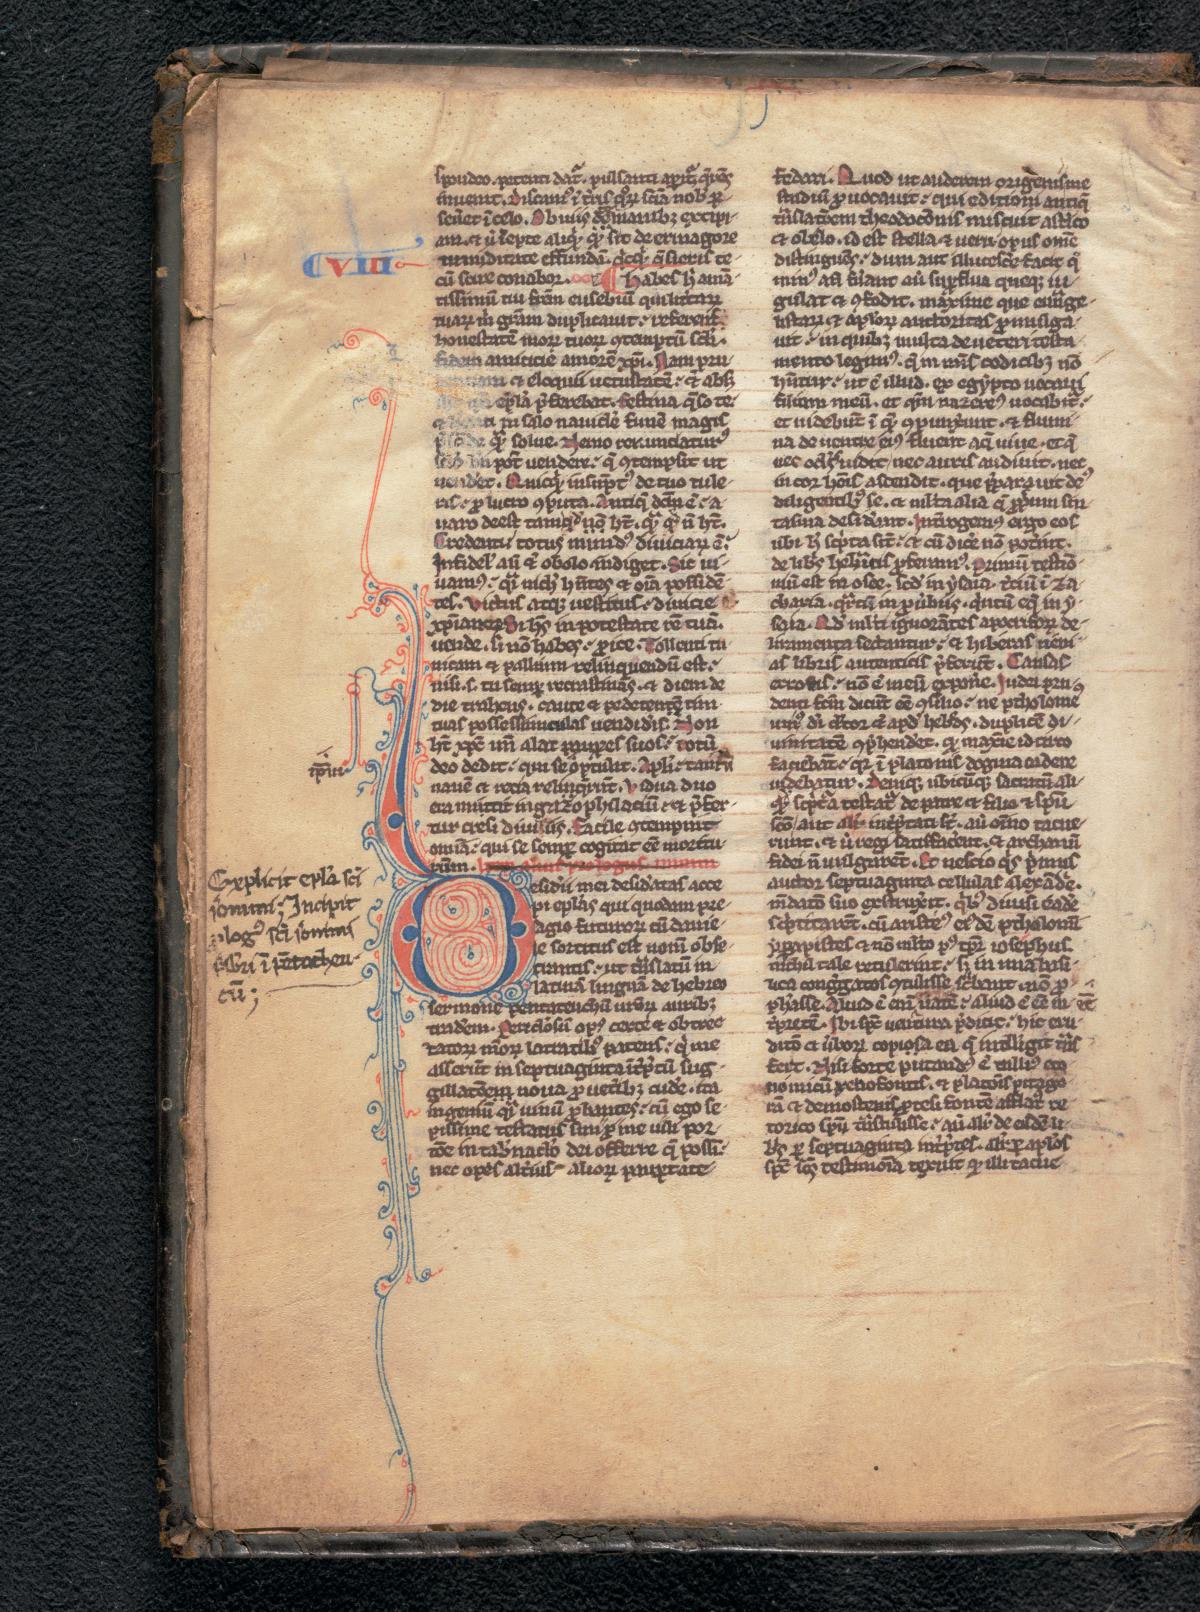 A richly decorated handwritten page from an old bible. It is written in Latin. The text is in black ink. In the margins of the page are blue and red decorations